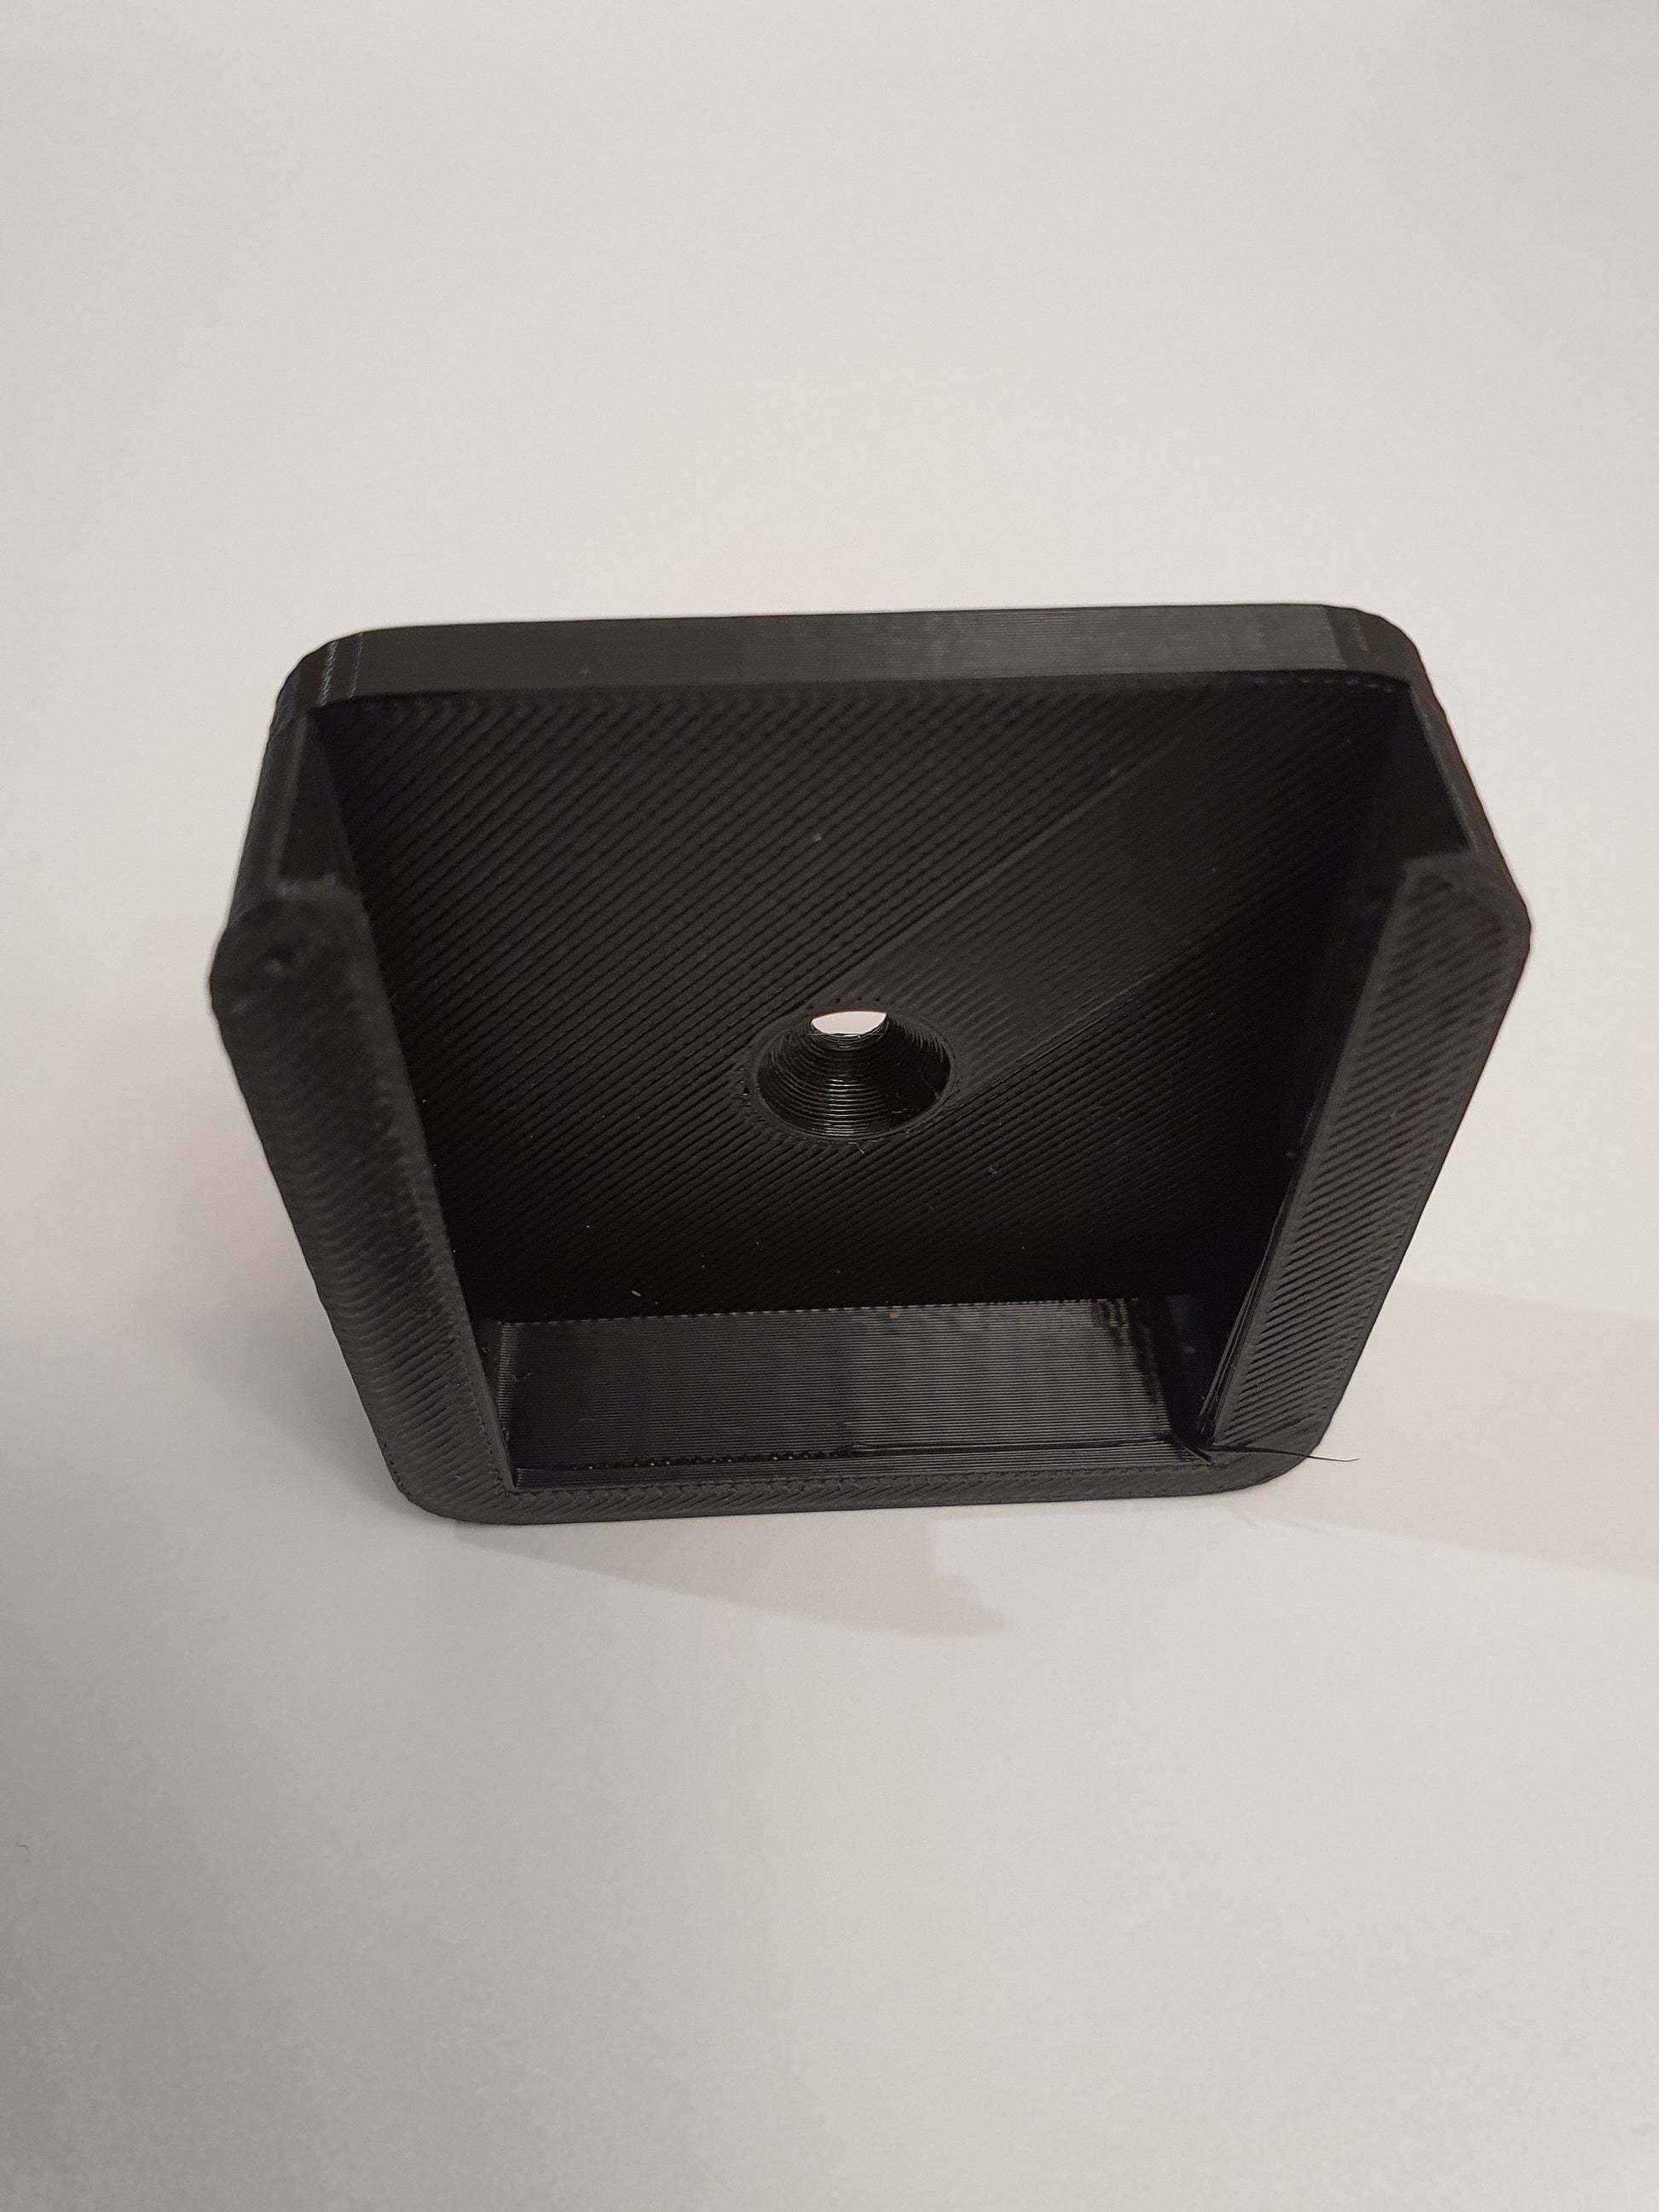 Wyze Cam Mount. Slim Design, Easy Install. Fits V2. Get The Perfect Viewing Angle With Wyze Cam Mount Slim